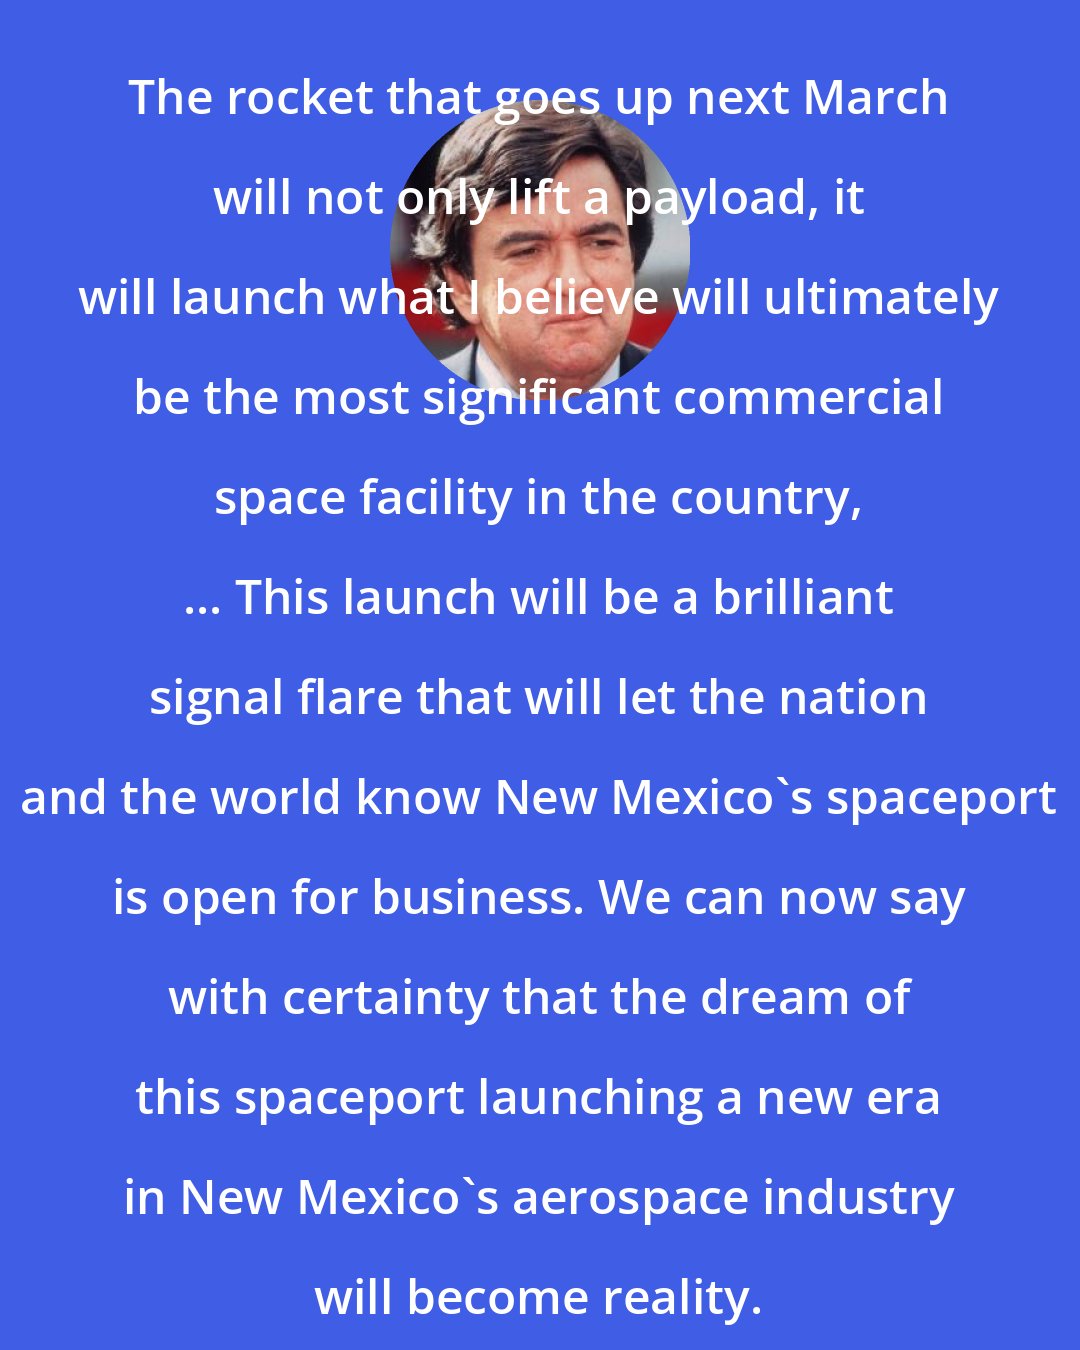 Bill Richardson: The rocket that goes up next March will not only lift a payload, it will launch what I believe will ultimately be the most significant commercial space facility in the country, ... This launch will be a brilliant signal flare that will let the nation and the world know New Mexico's spaceport is open for business. We can now say with certainty that the dream of this spaceport launching a new era in New Mexico's aerospace industry will become reality.